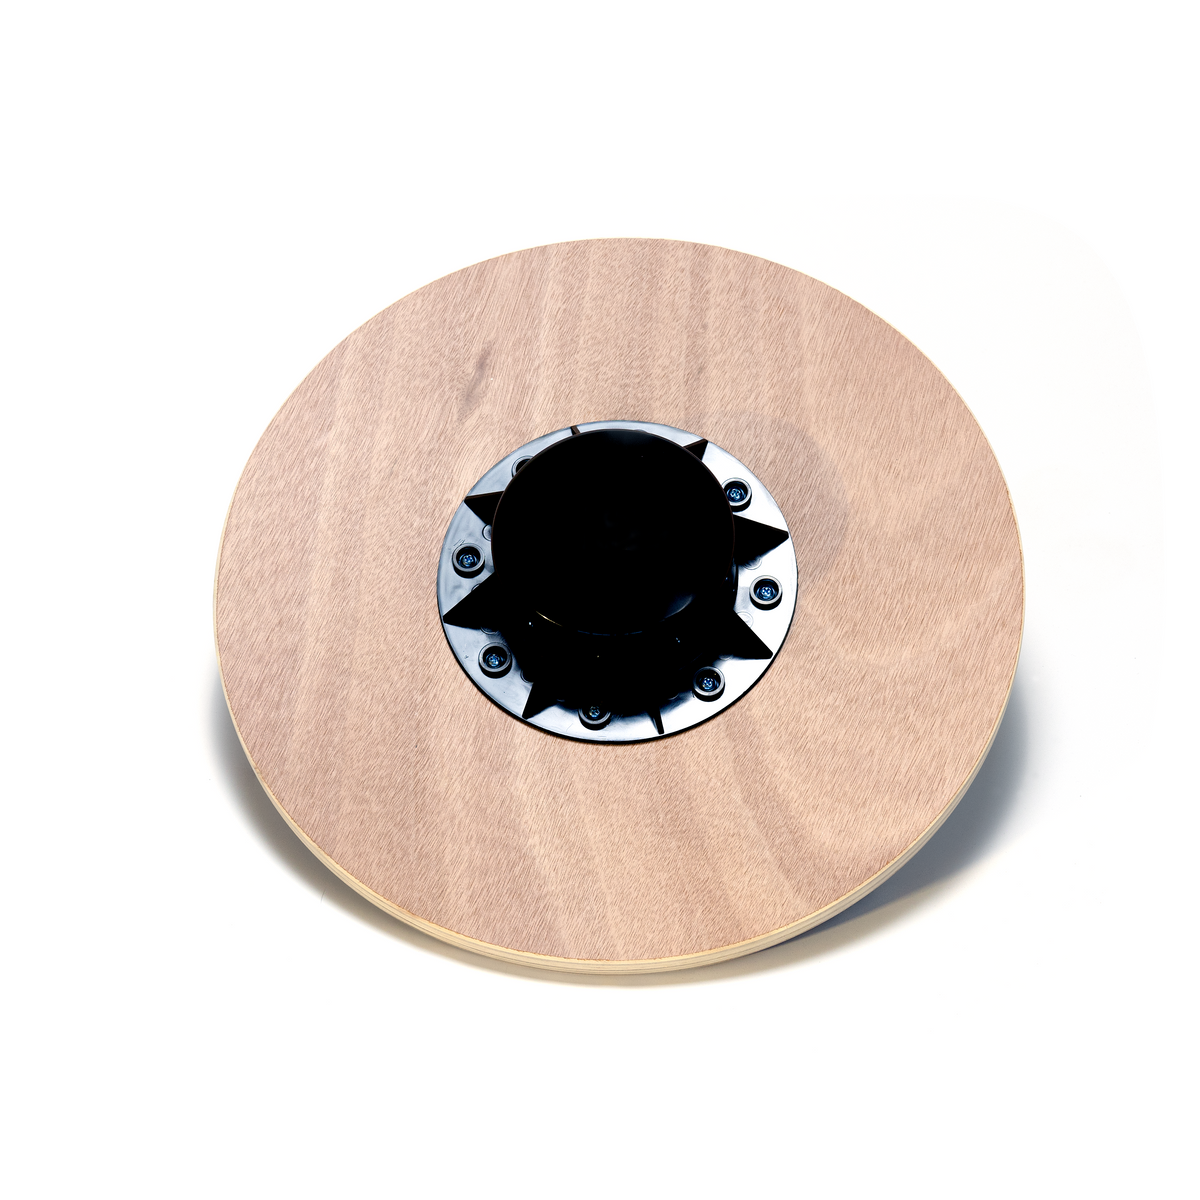 FitWay Equip. Wooden Balance Board 